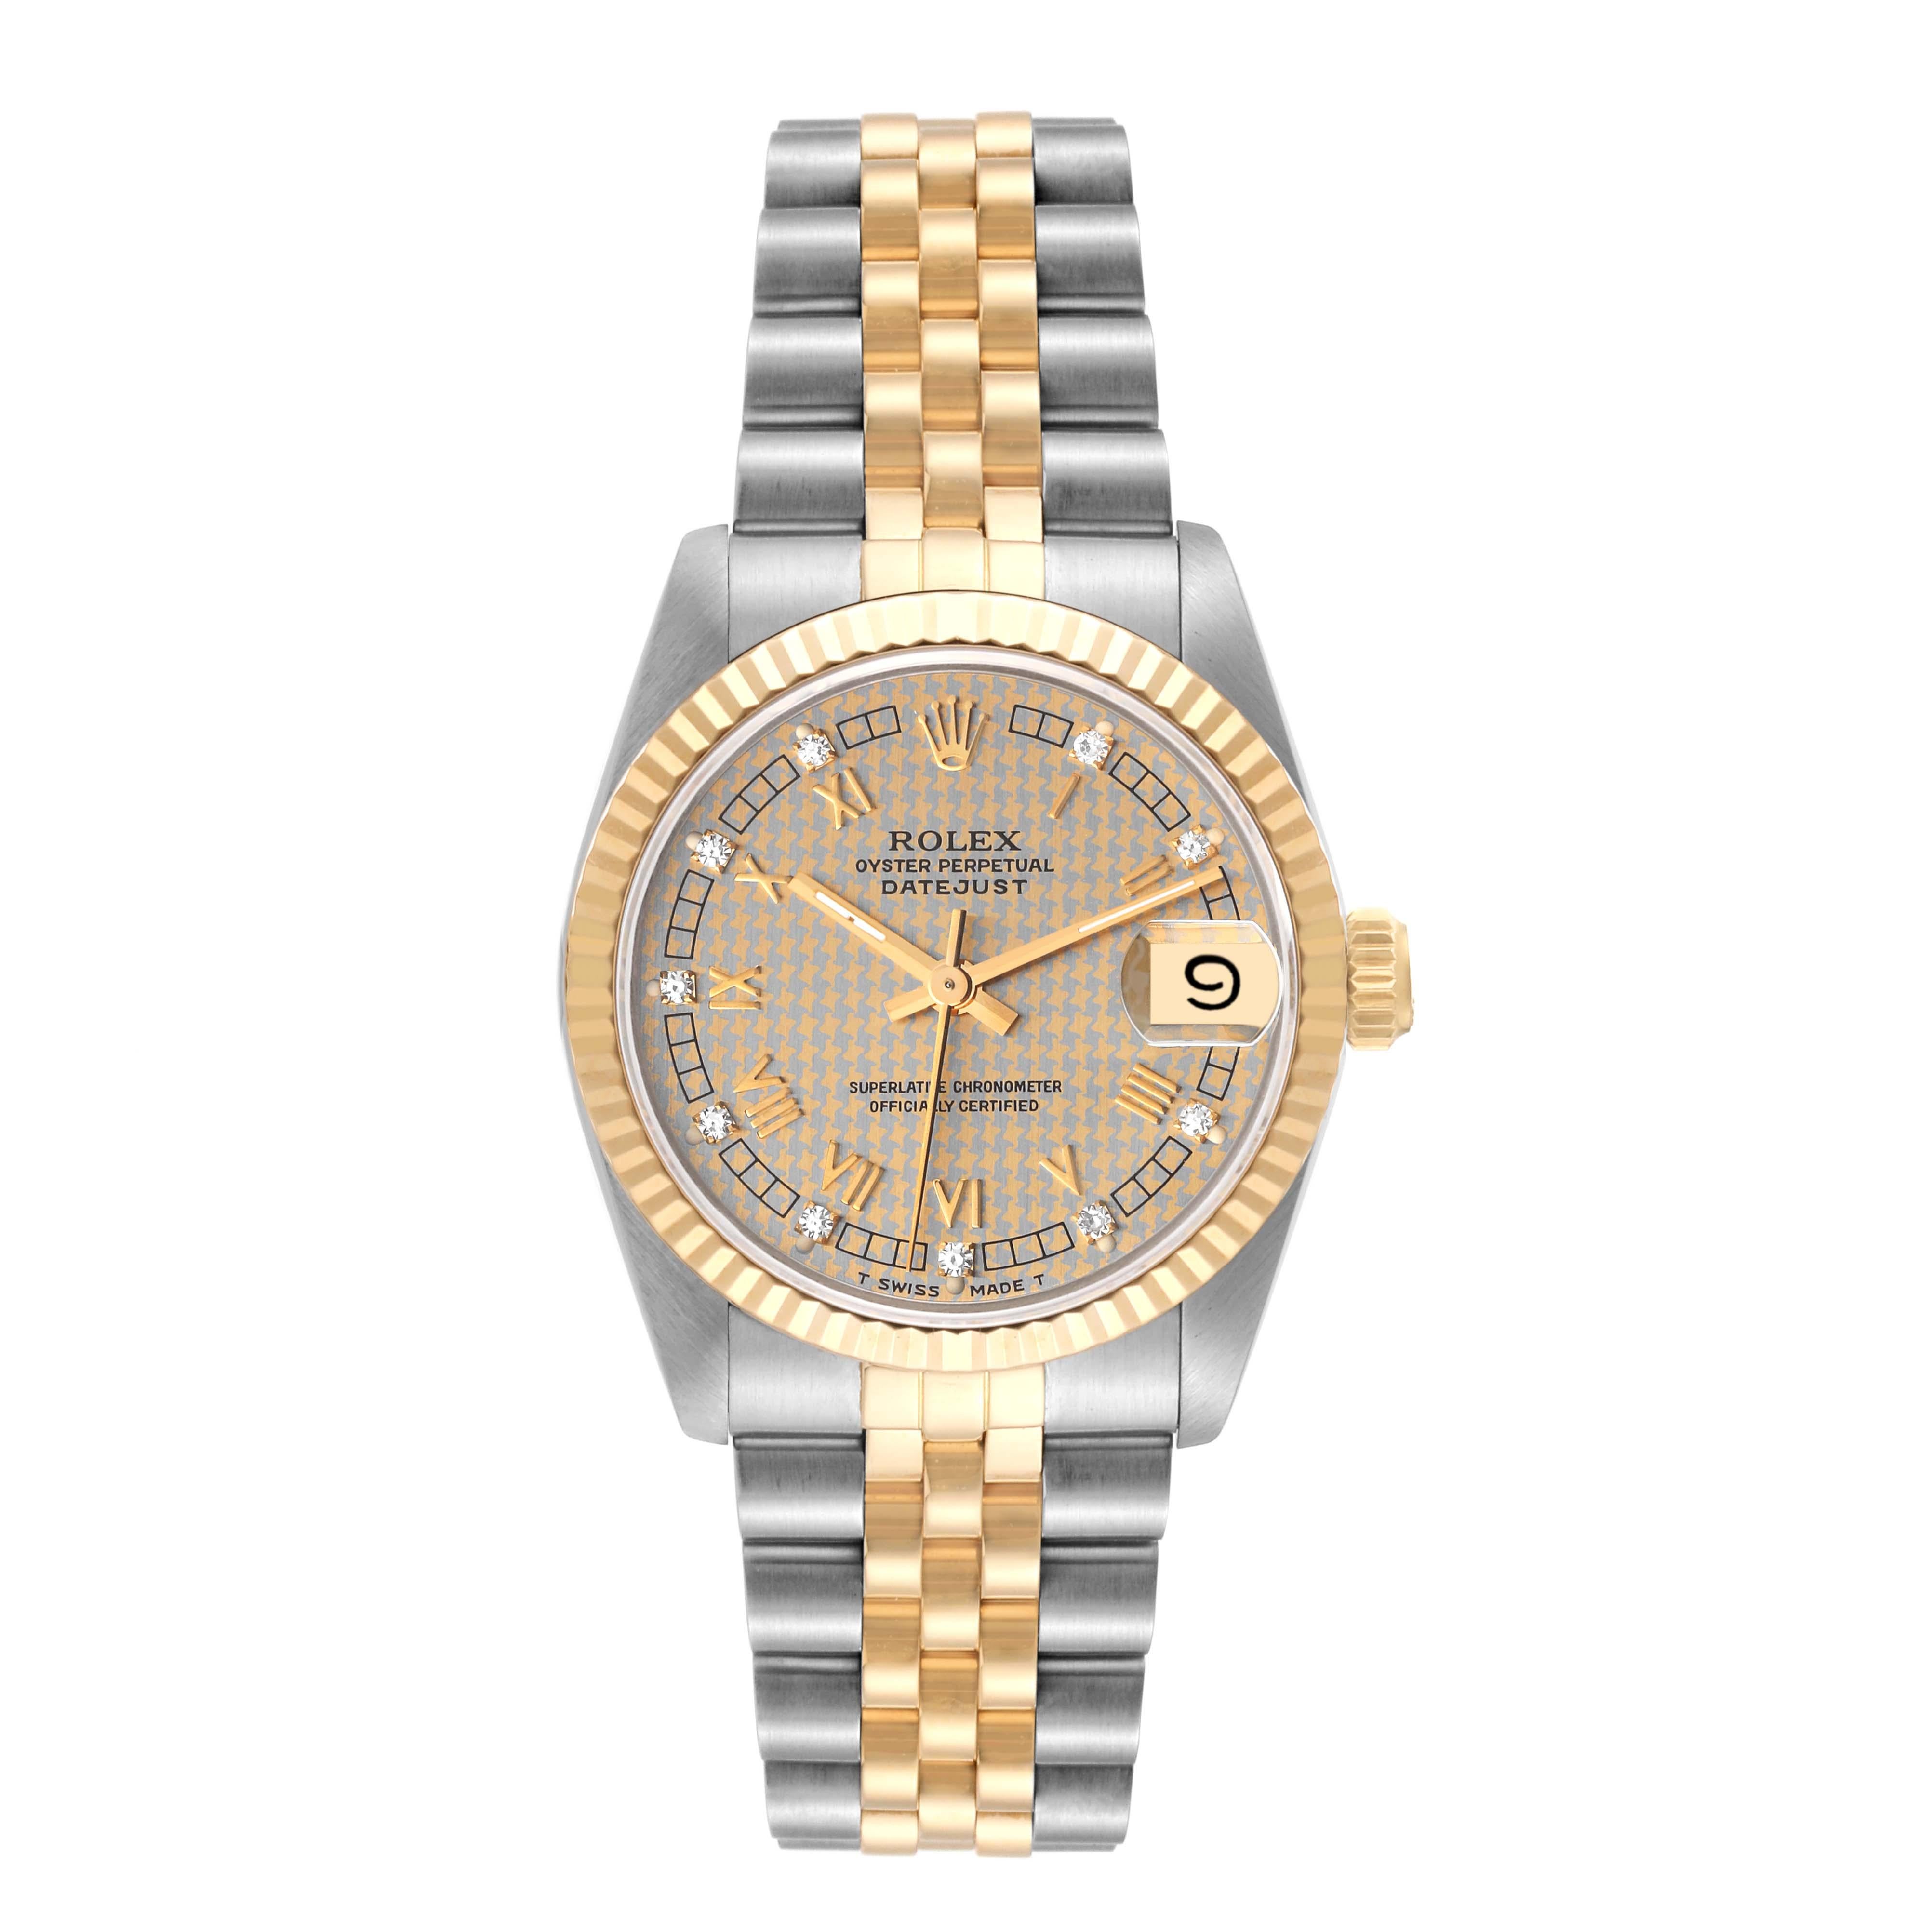 Rolex Datejust Midsize Steel Yellow Gold Houndstooth Diamond Ladies Watch 68273. Officially certified chronometer automatic self-winding movement. Stainless steel oyster case 31 mm in diameter. Rolex logo on an 18K yellow gold crown. 18k yellow gold